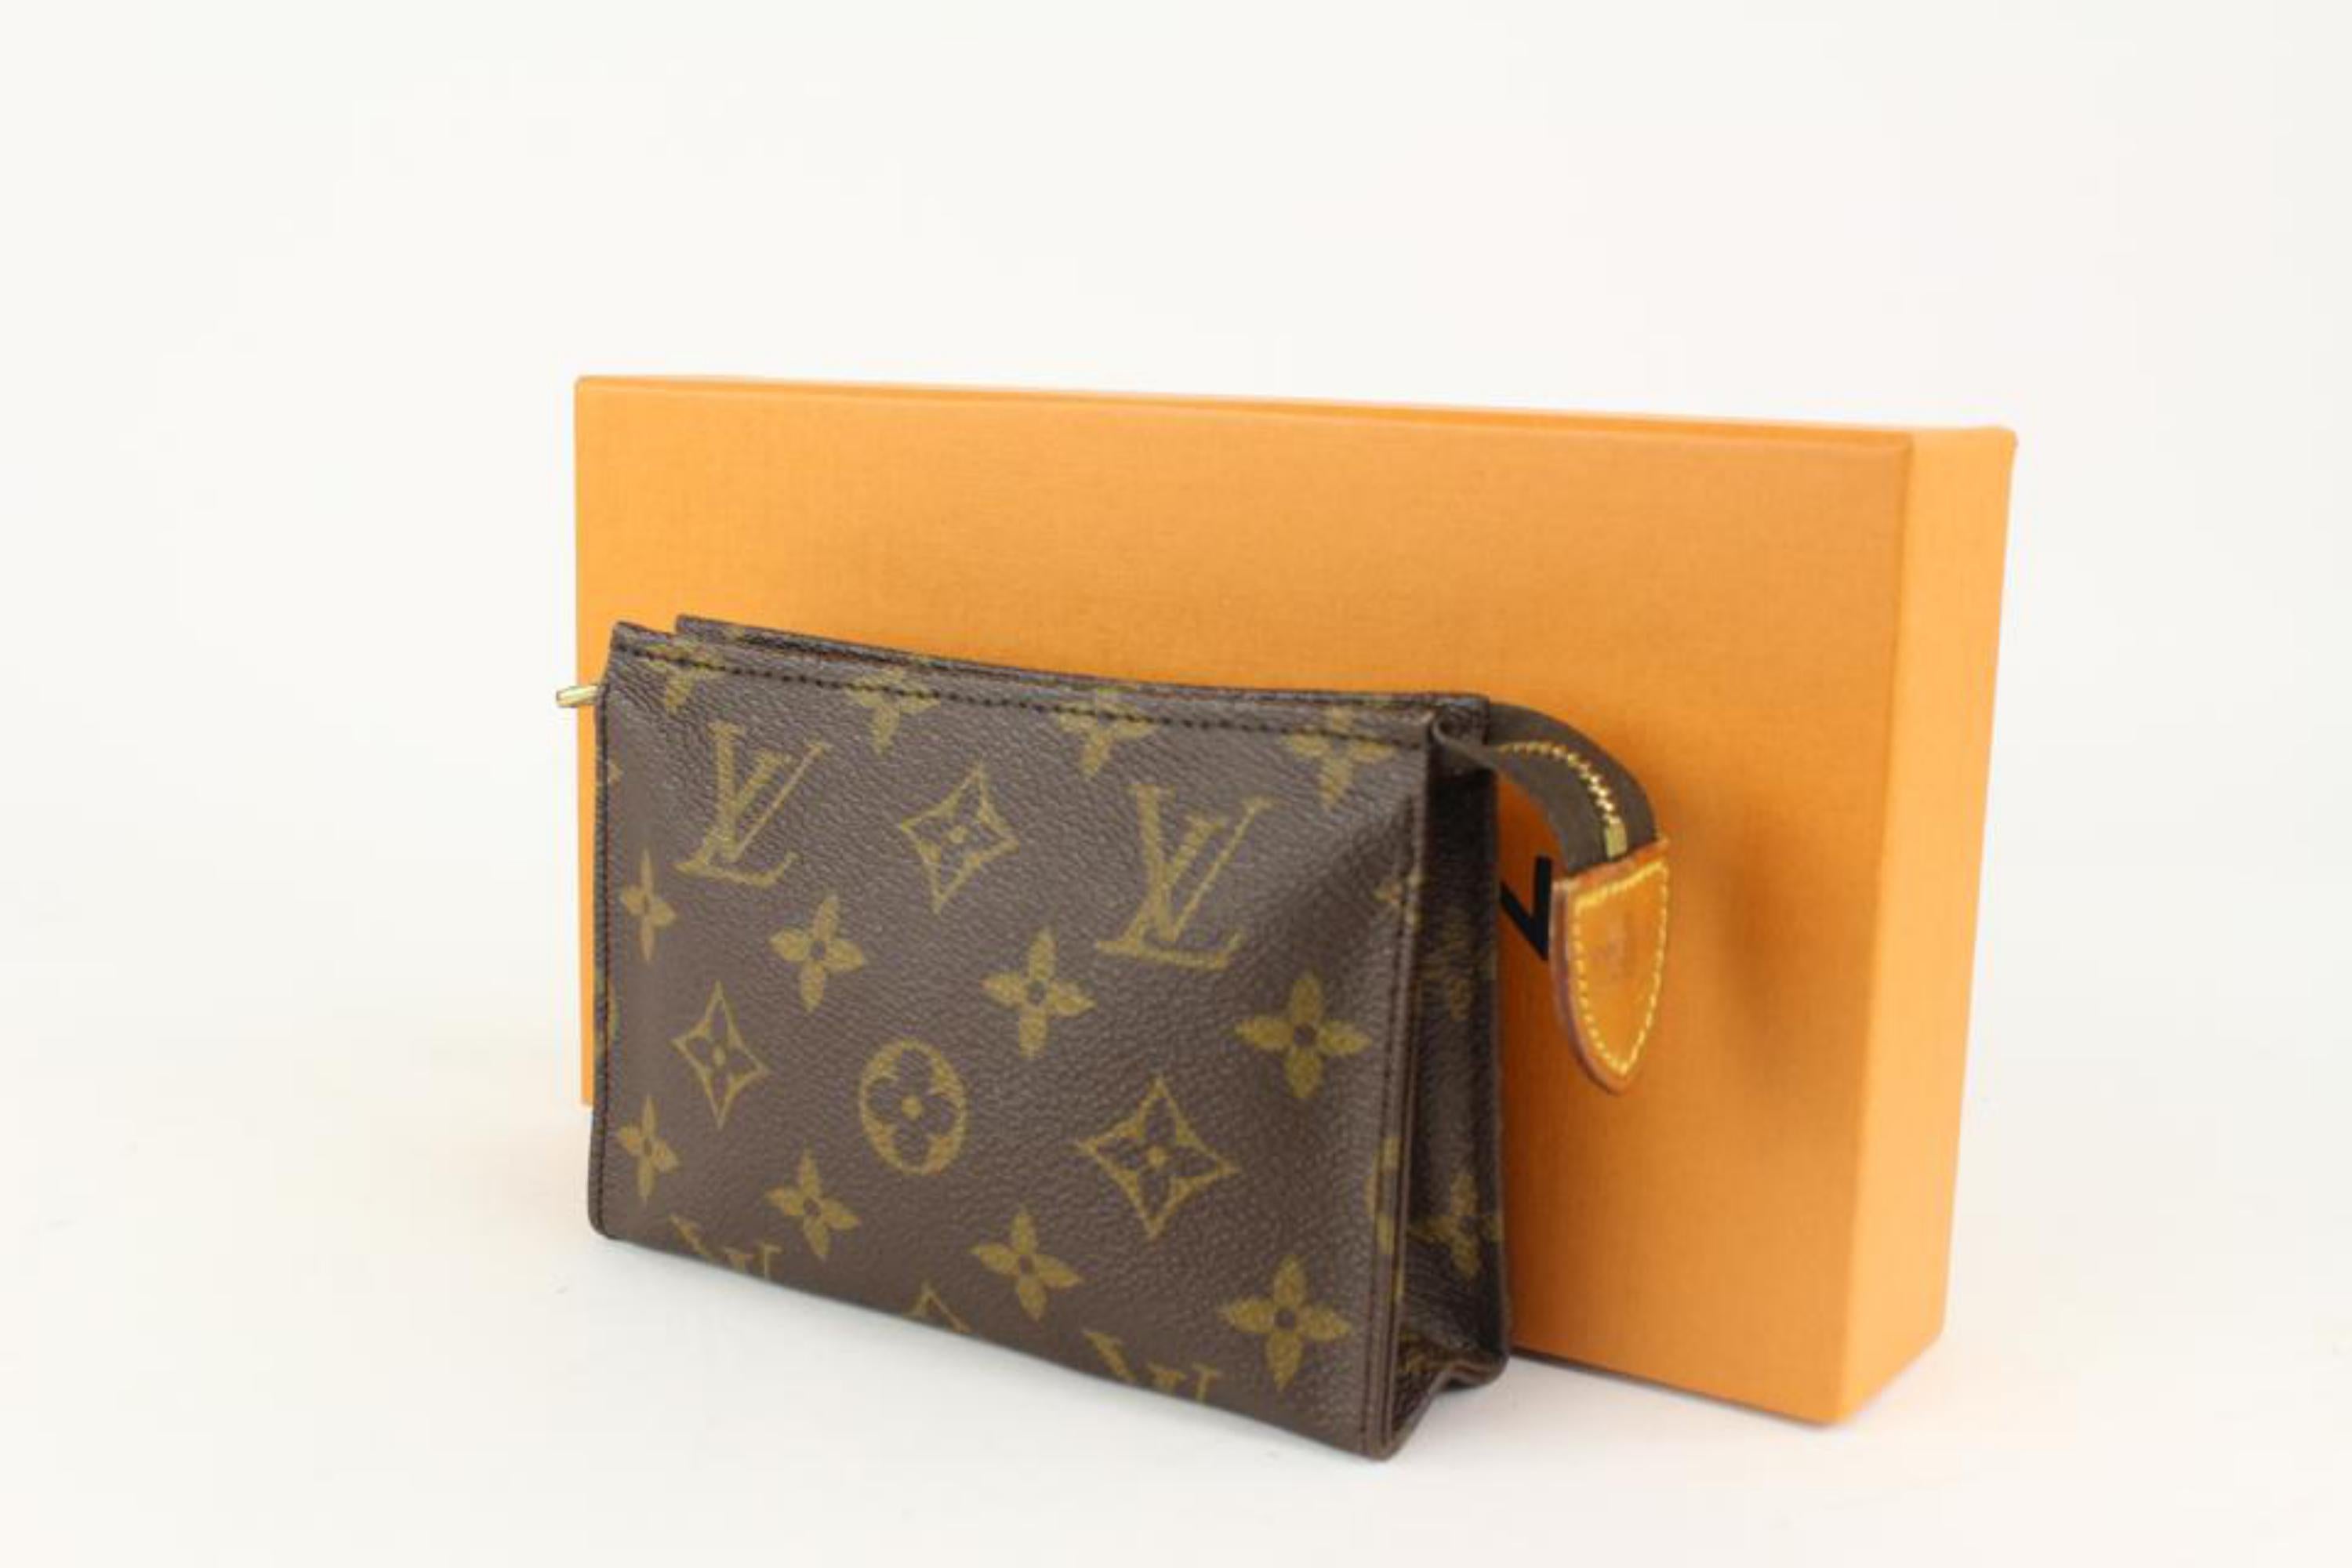 Louis Vuitton Monogram Toiletry Pouch 15 Poche Toilette 0LV323L
Date Code/Serial Number: 884 TH
Made In: France
Measurements: Length:  5.75